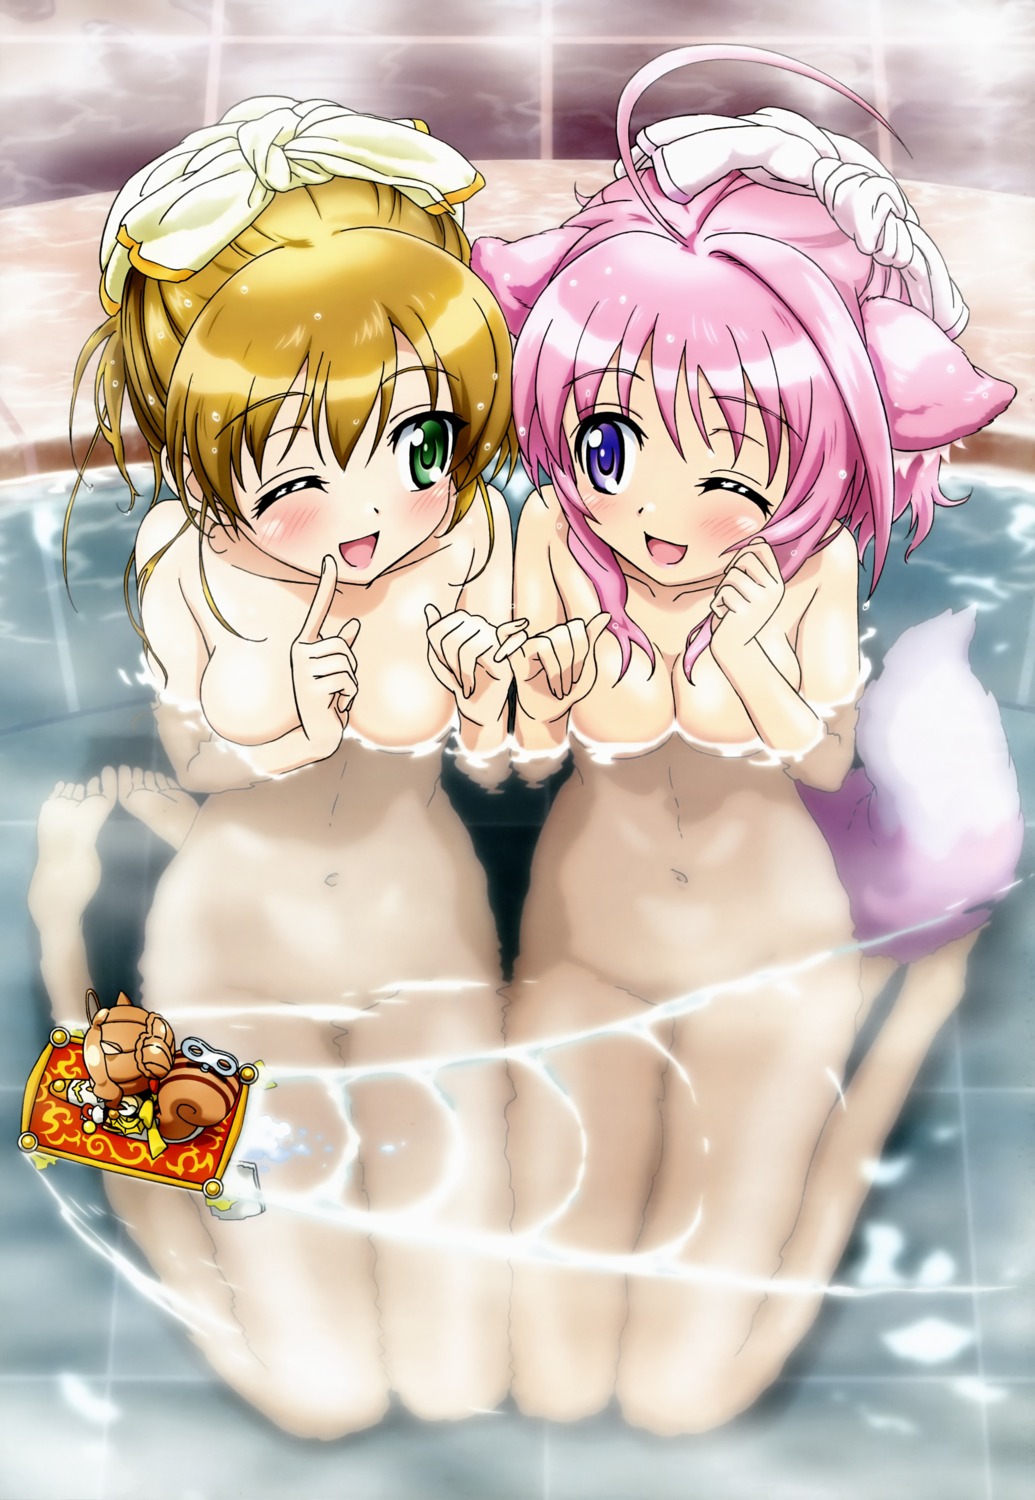 animal_ears bathing cleavage dog_days hashidate_kana inumimi millhiore_f_biscotti naked rebecca_anderson tail wet